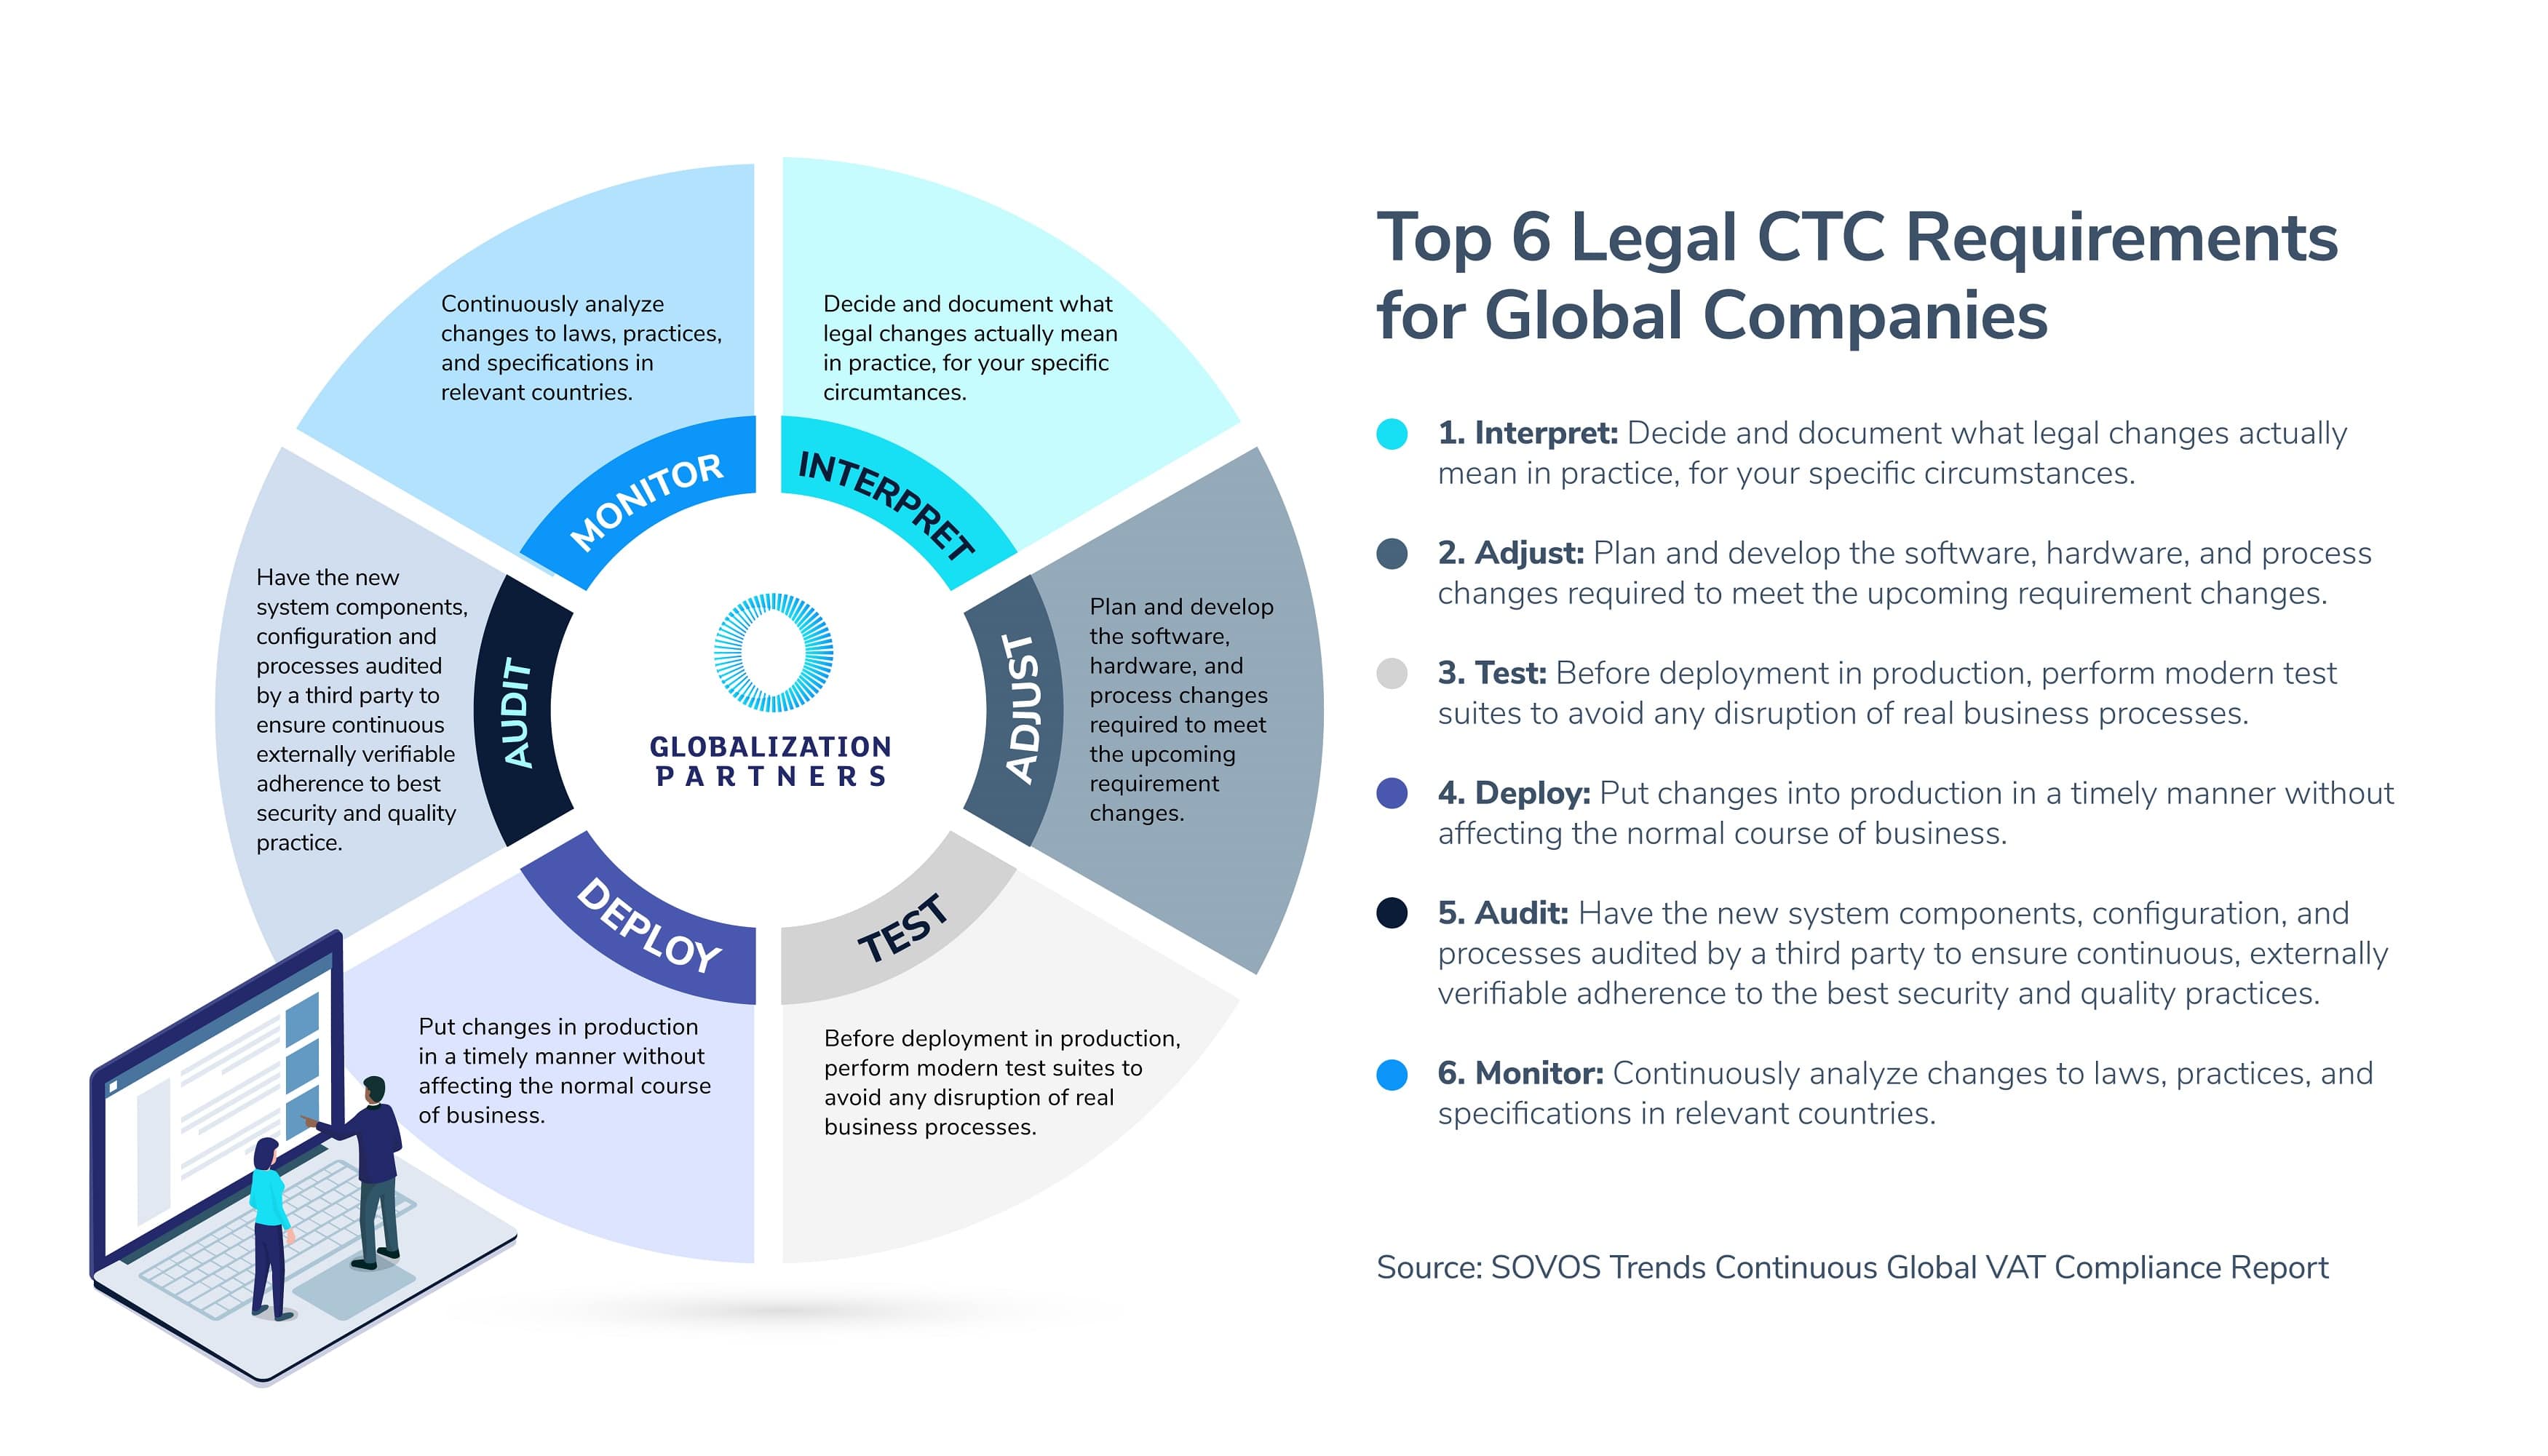 Infographic of Top 6 Legal CTC Requirements for Global Companies